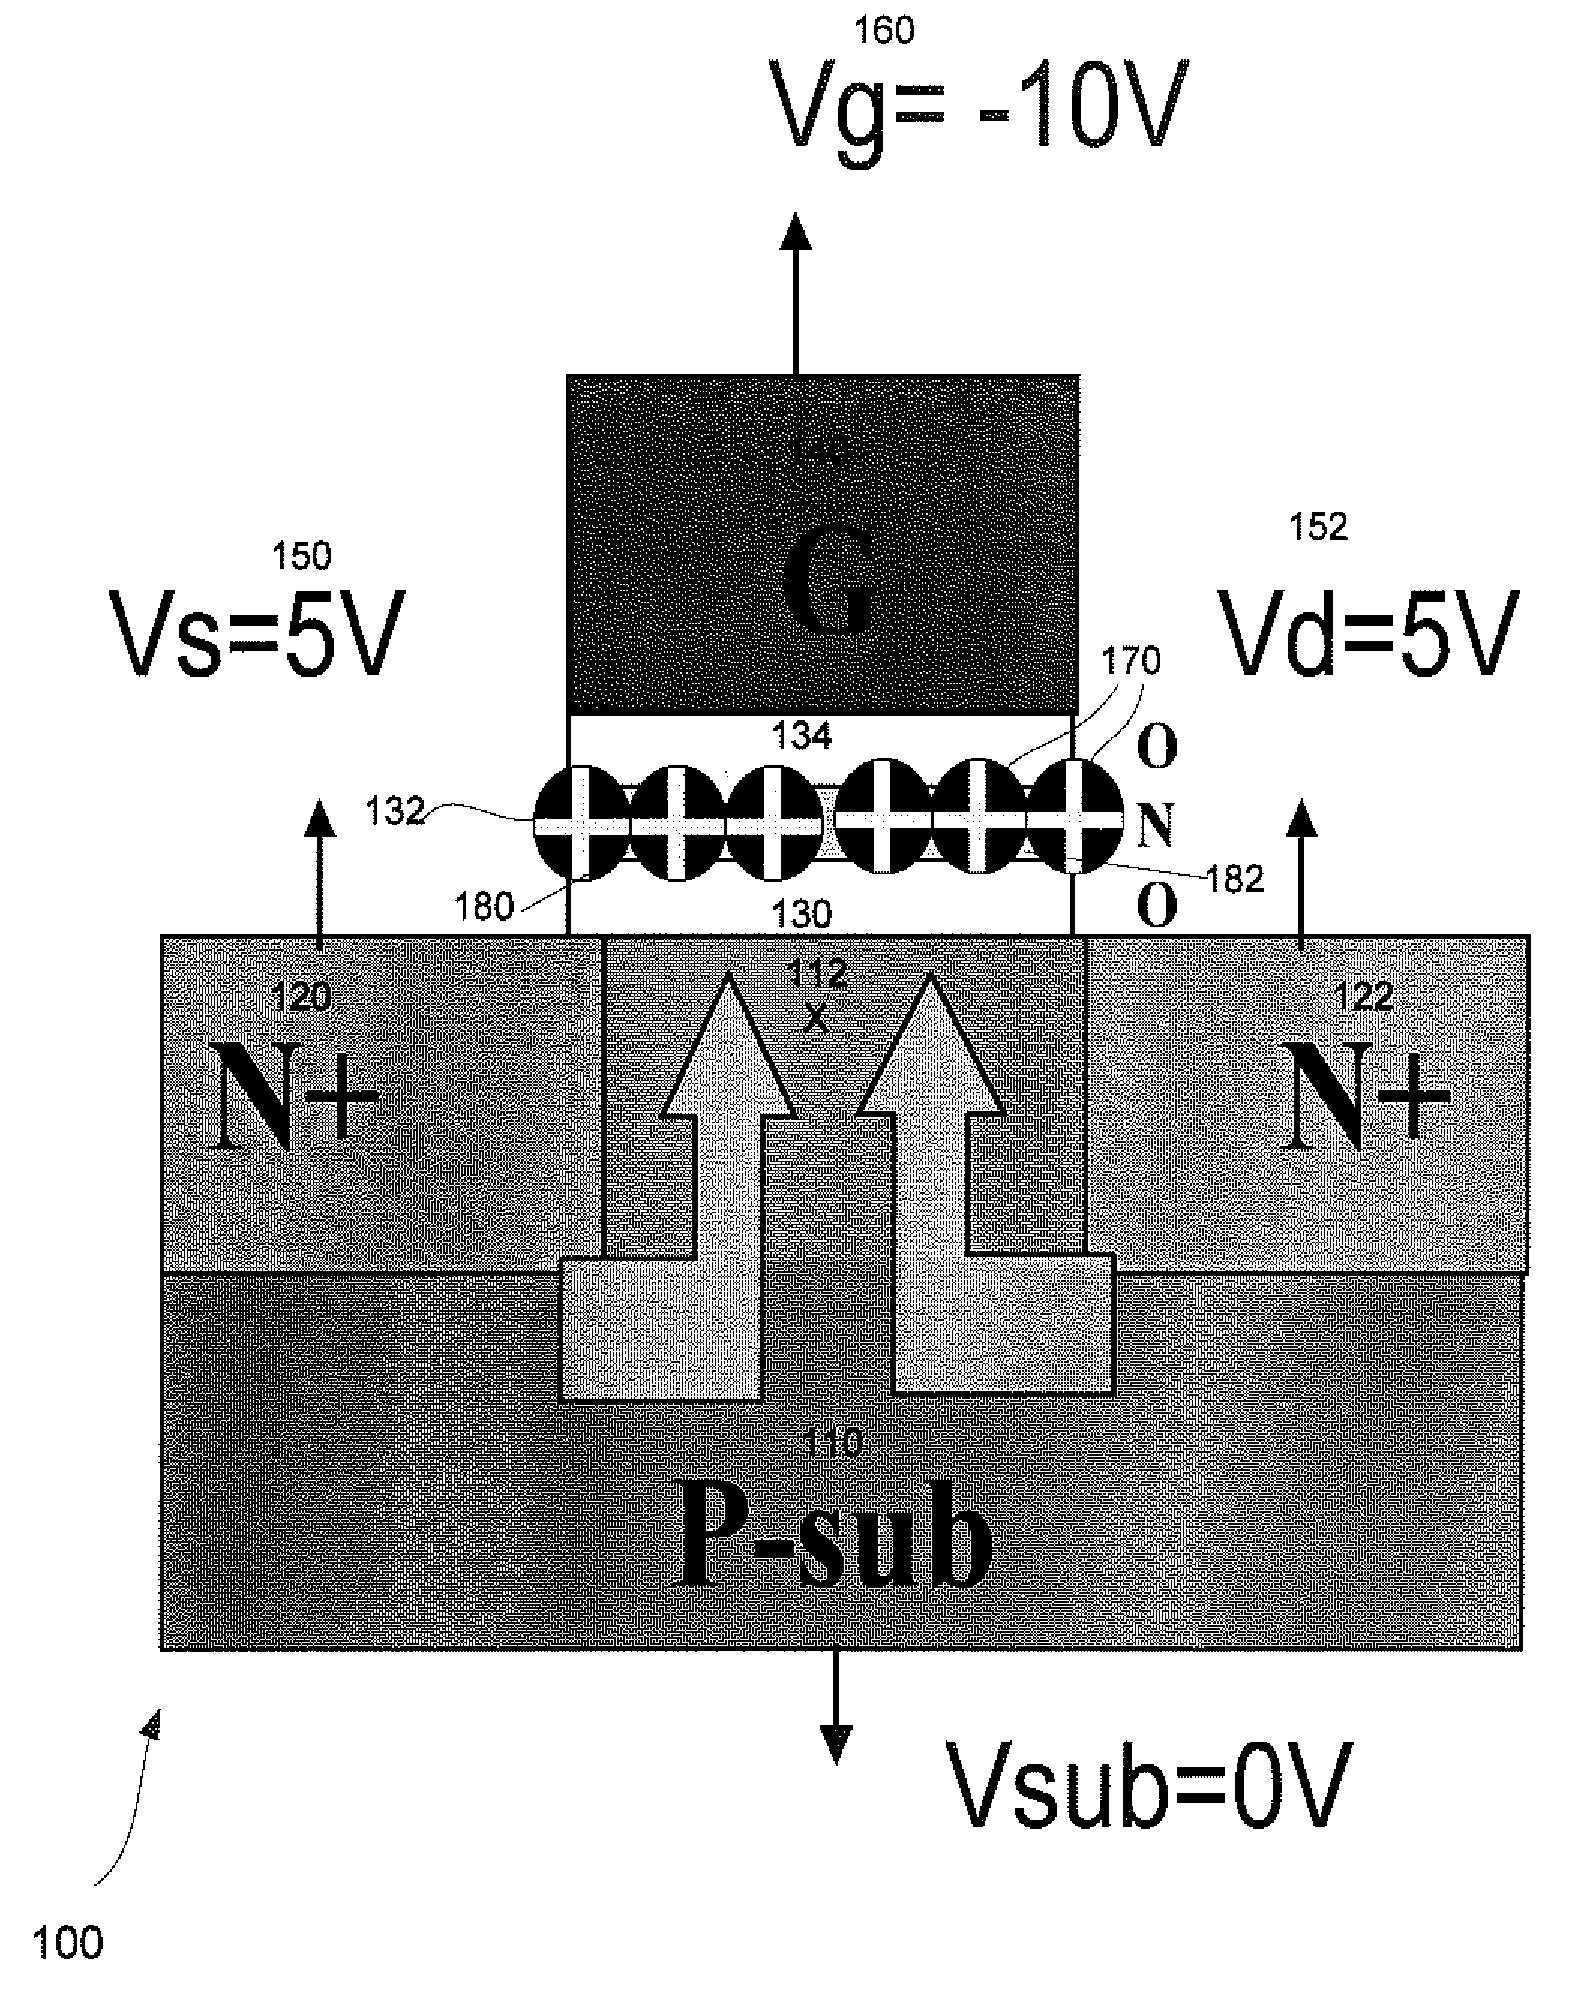 Double-Side-Bias Methods of Programming and Erasing a Virtual Ground Array Memory